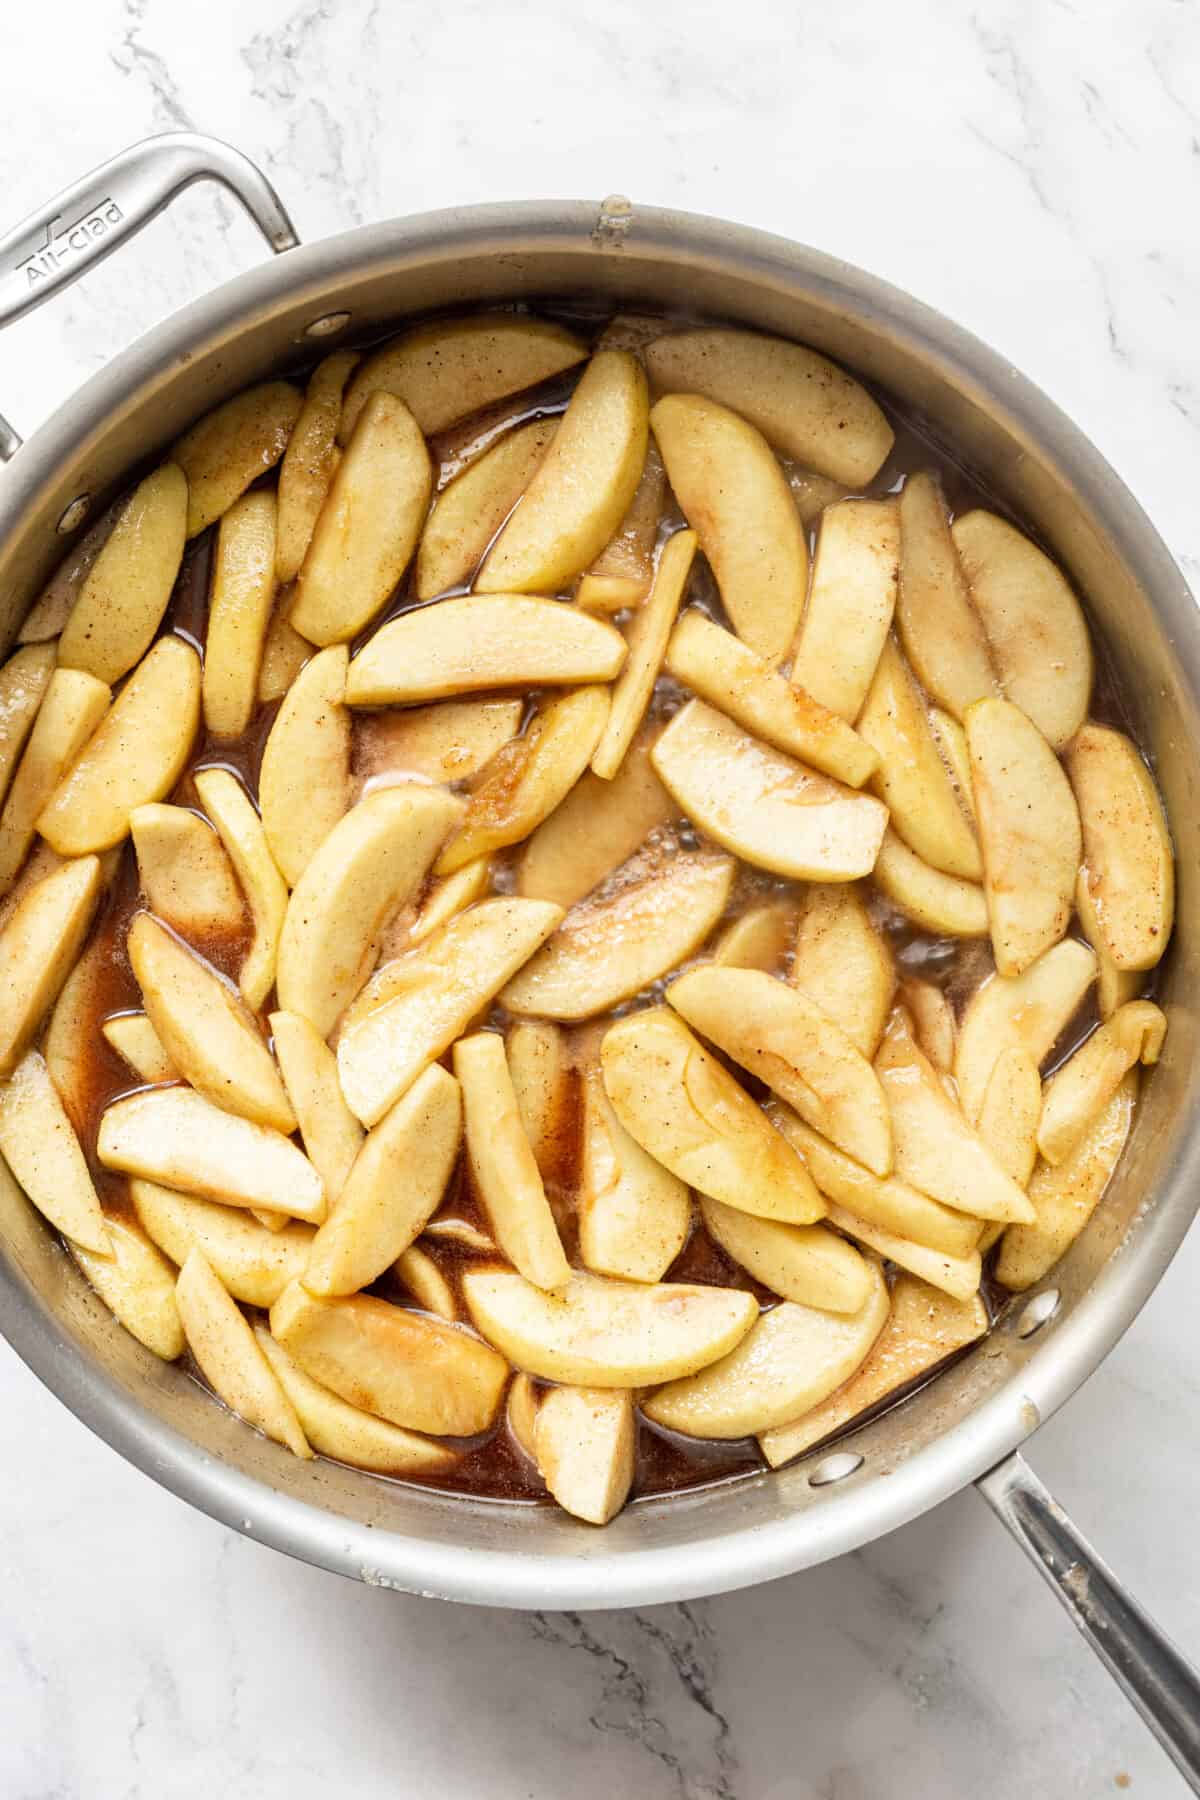 A top down shot of a pan full of sliced apples cooking in butter.